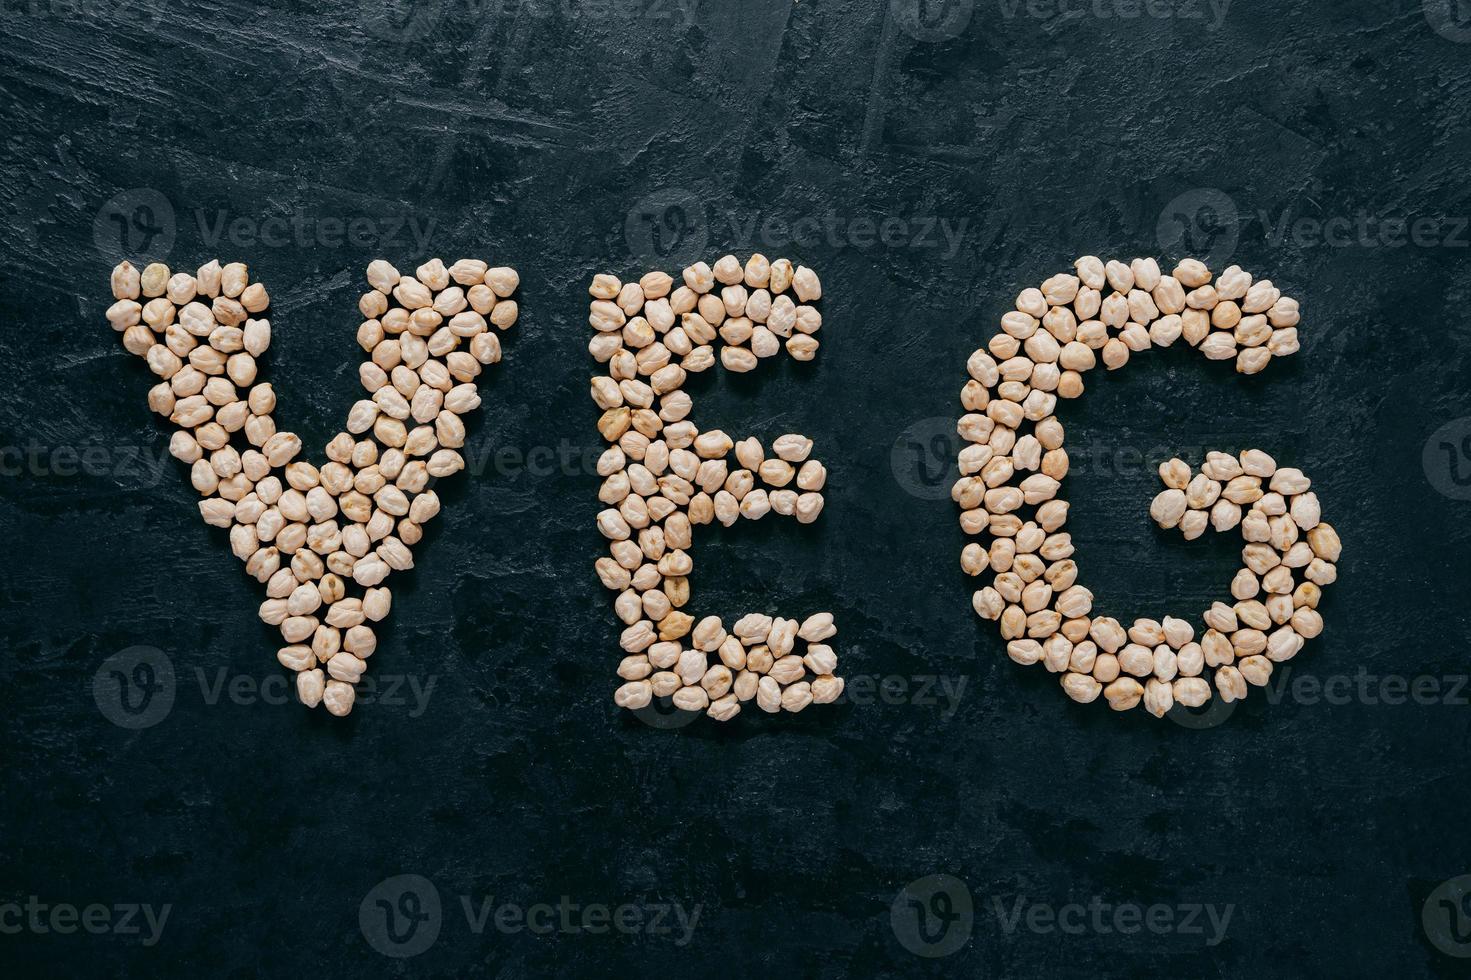 Uncooked chickpeas shaped in letters veg, isolated over dark background. Vegetarianism and healthy eating concept. Healthy nutrition photo